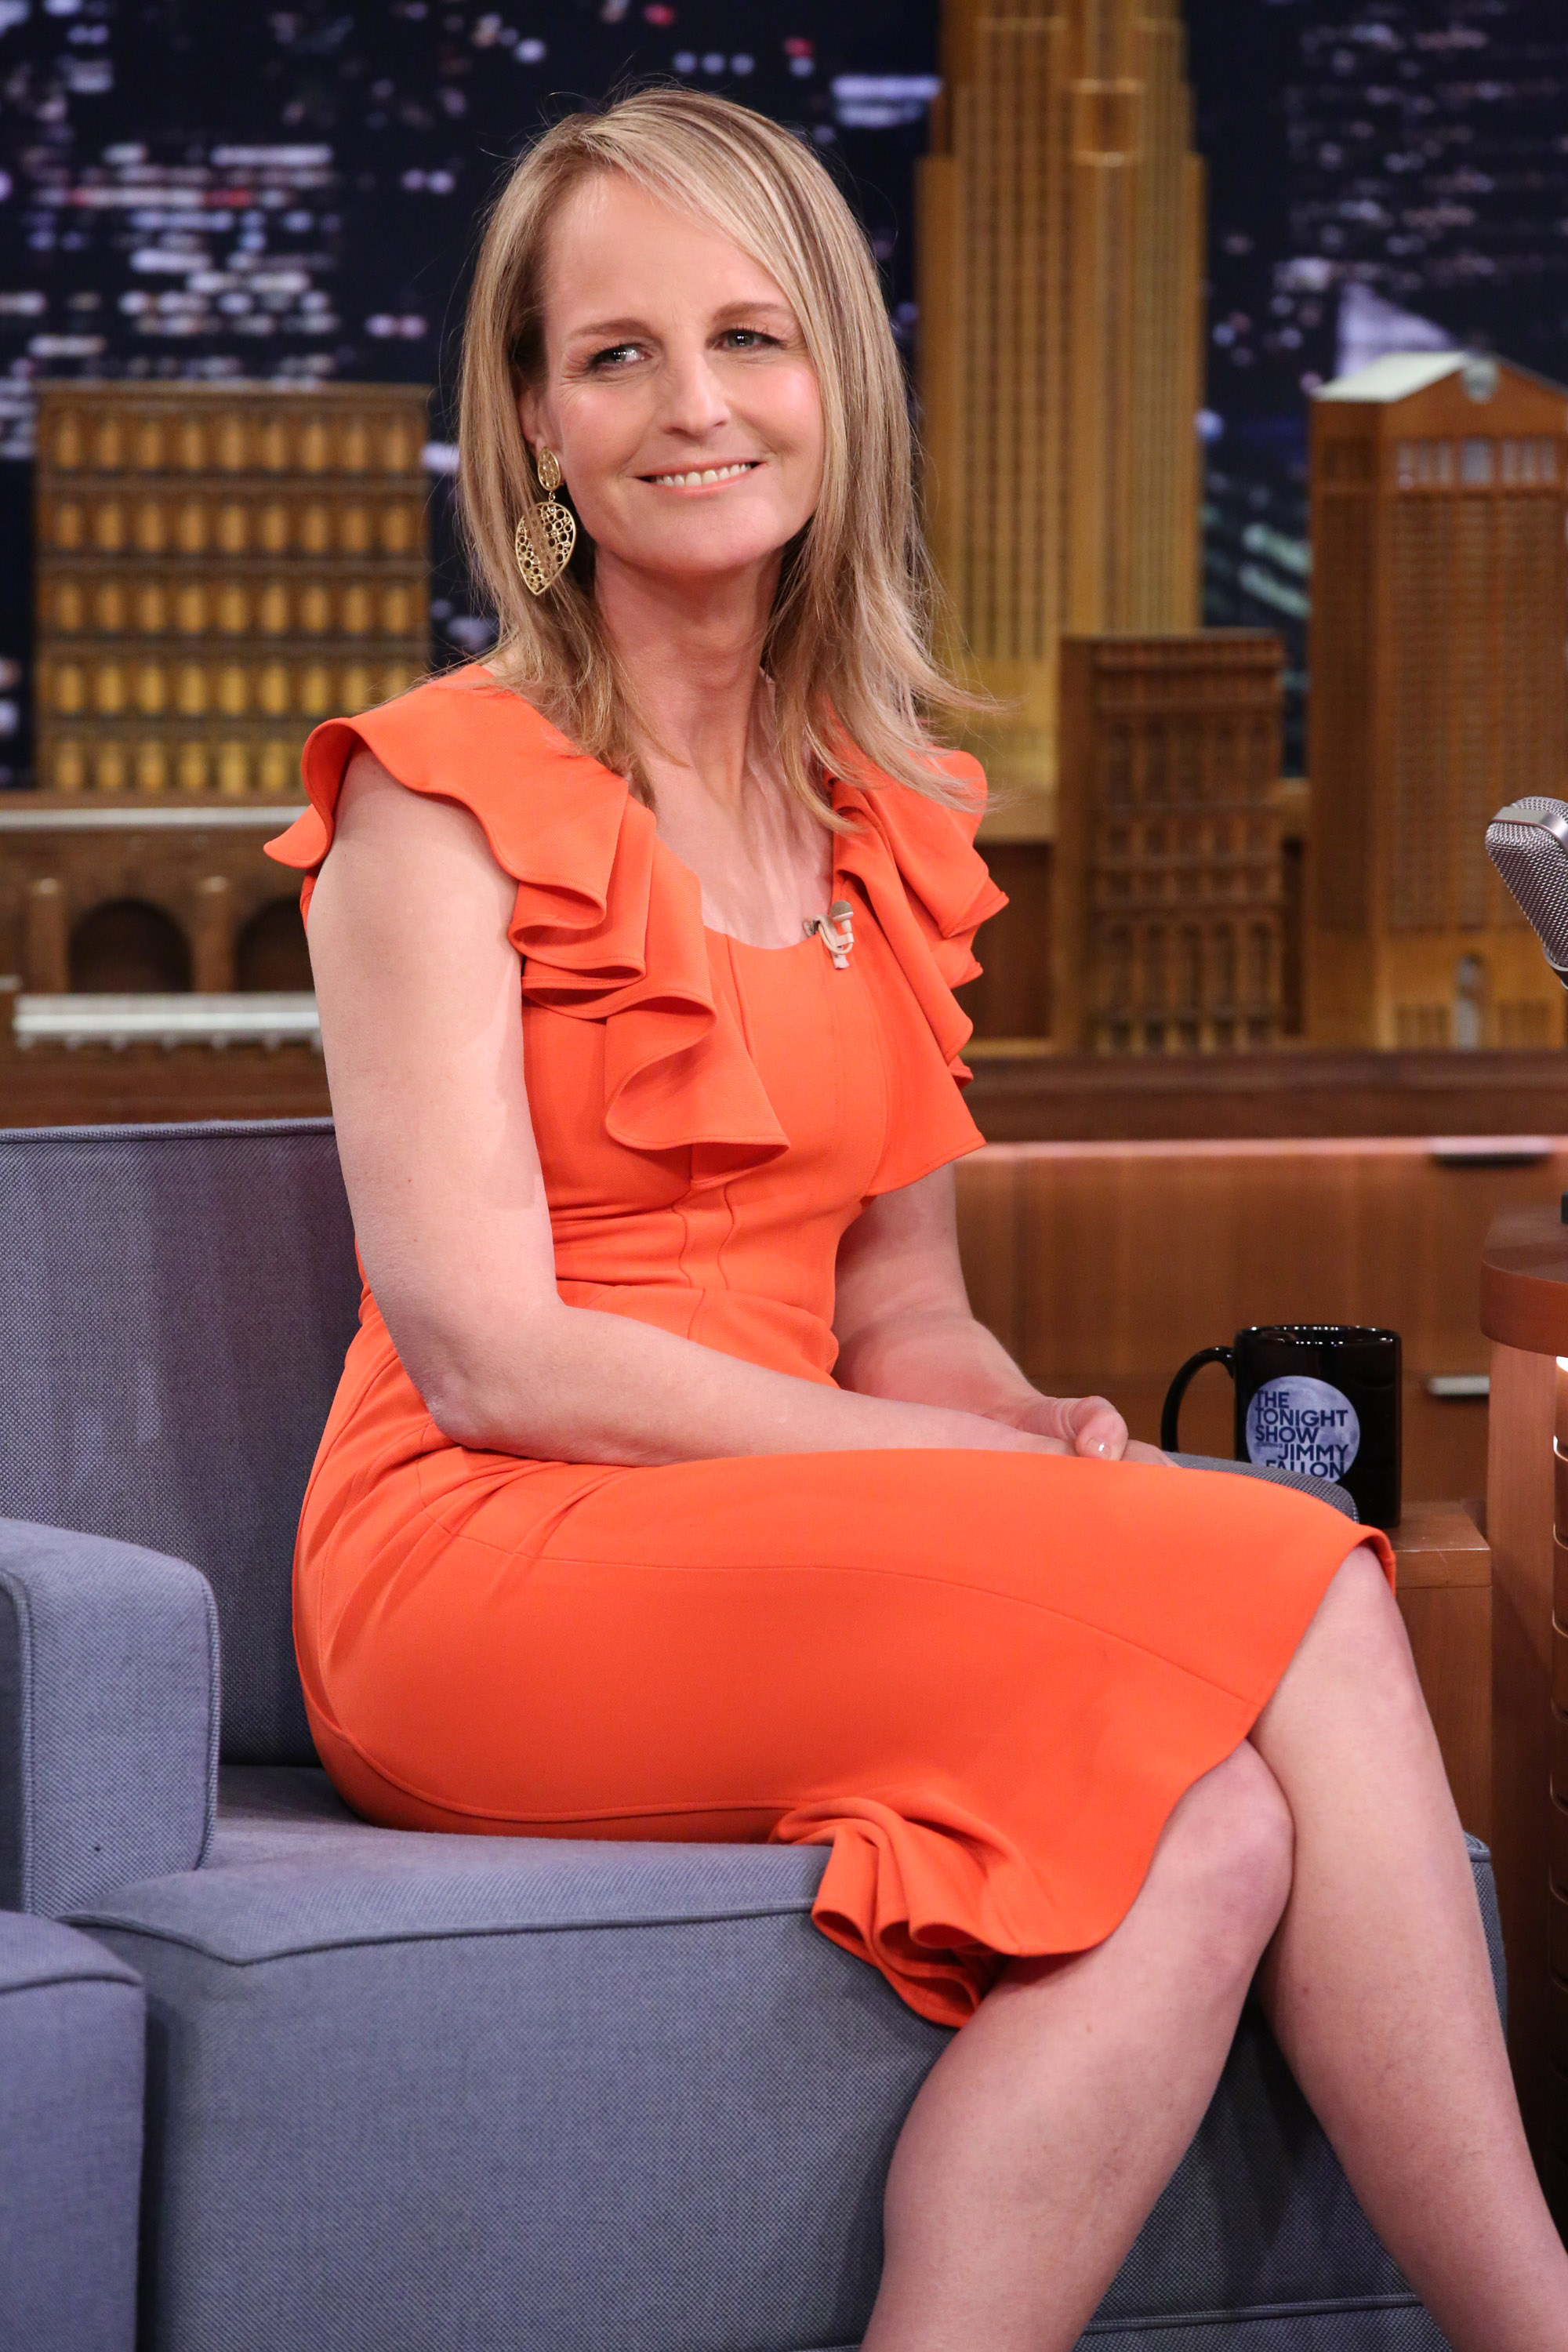 Helen Hunt during an appearance on "The Tonight Show Starring Jimmy Fallon" on May 1, 2015 | Source: Getty Images